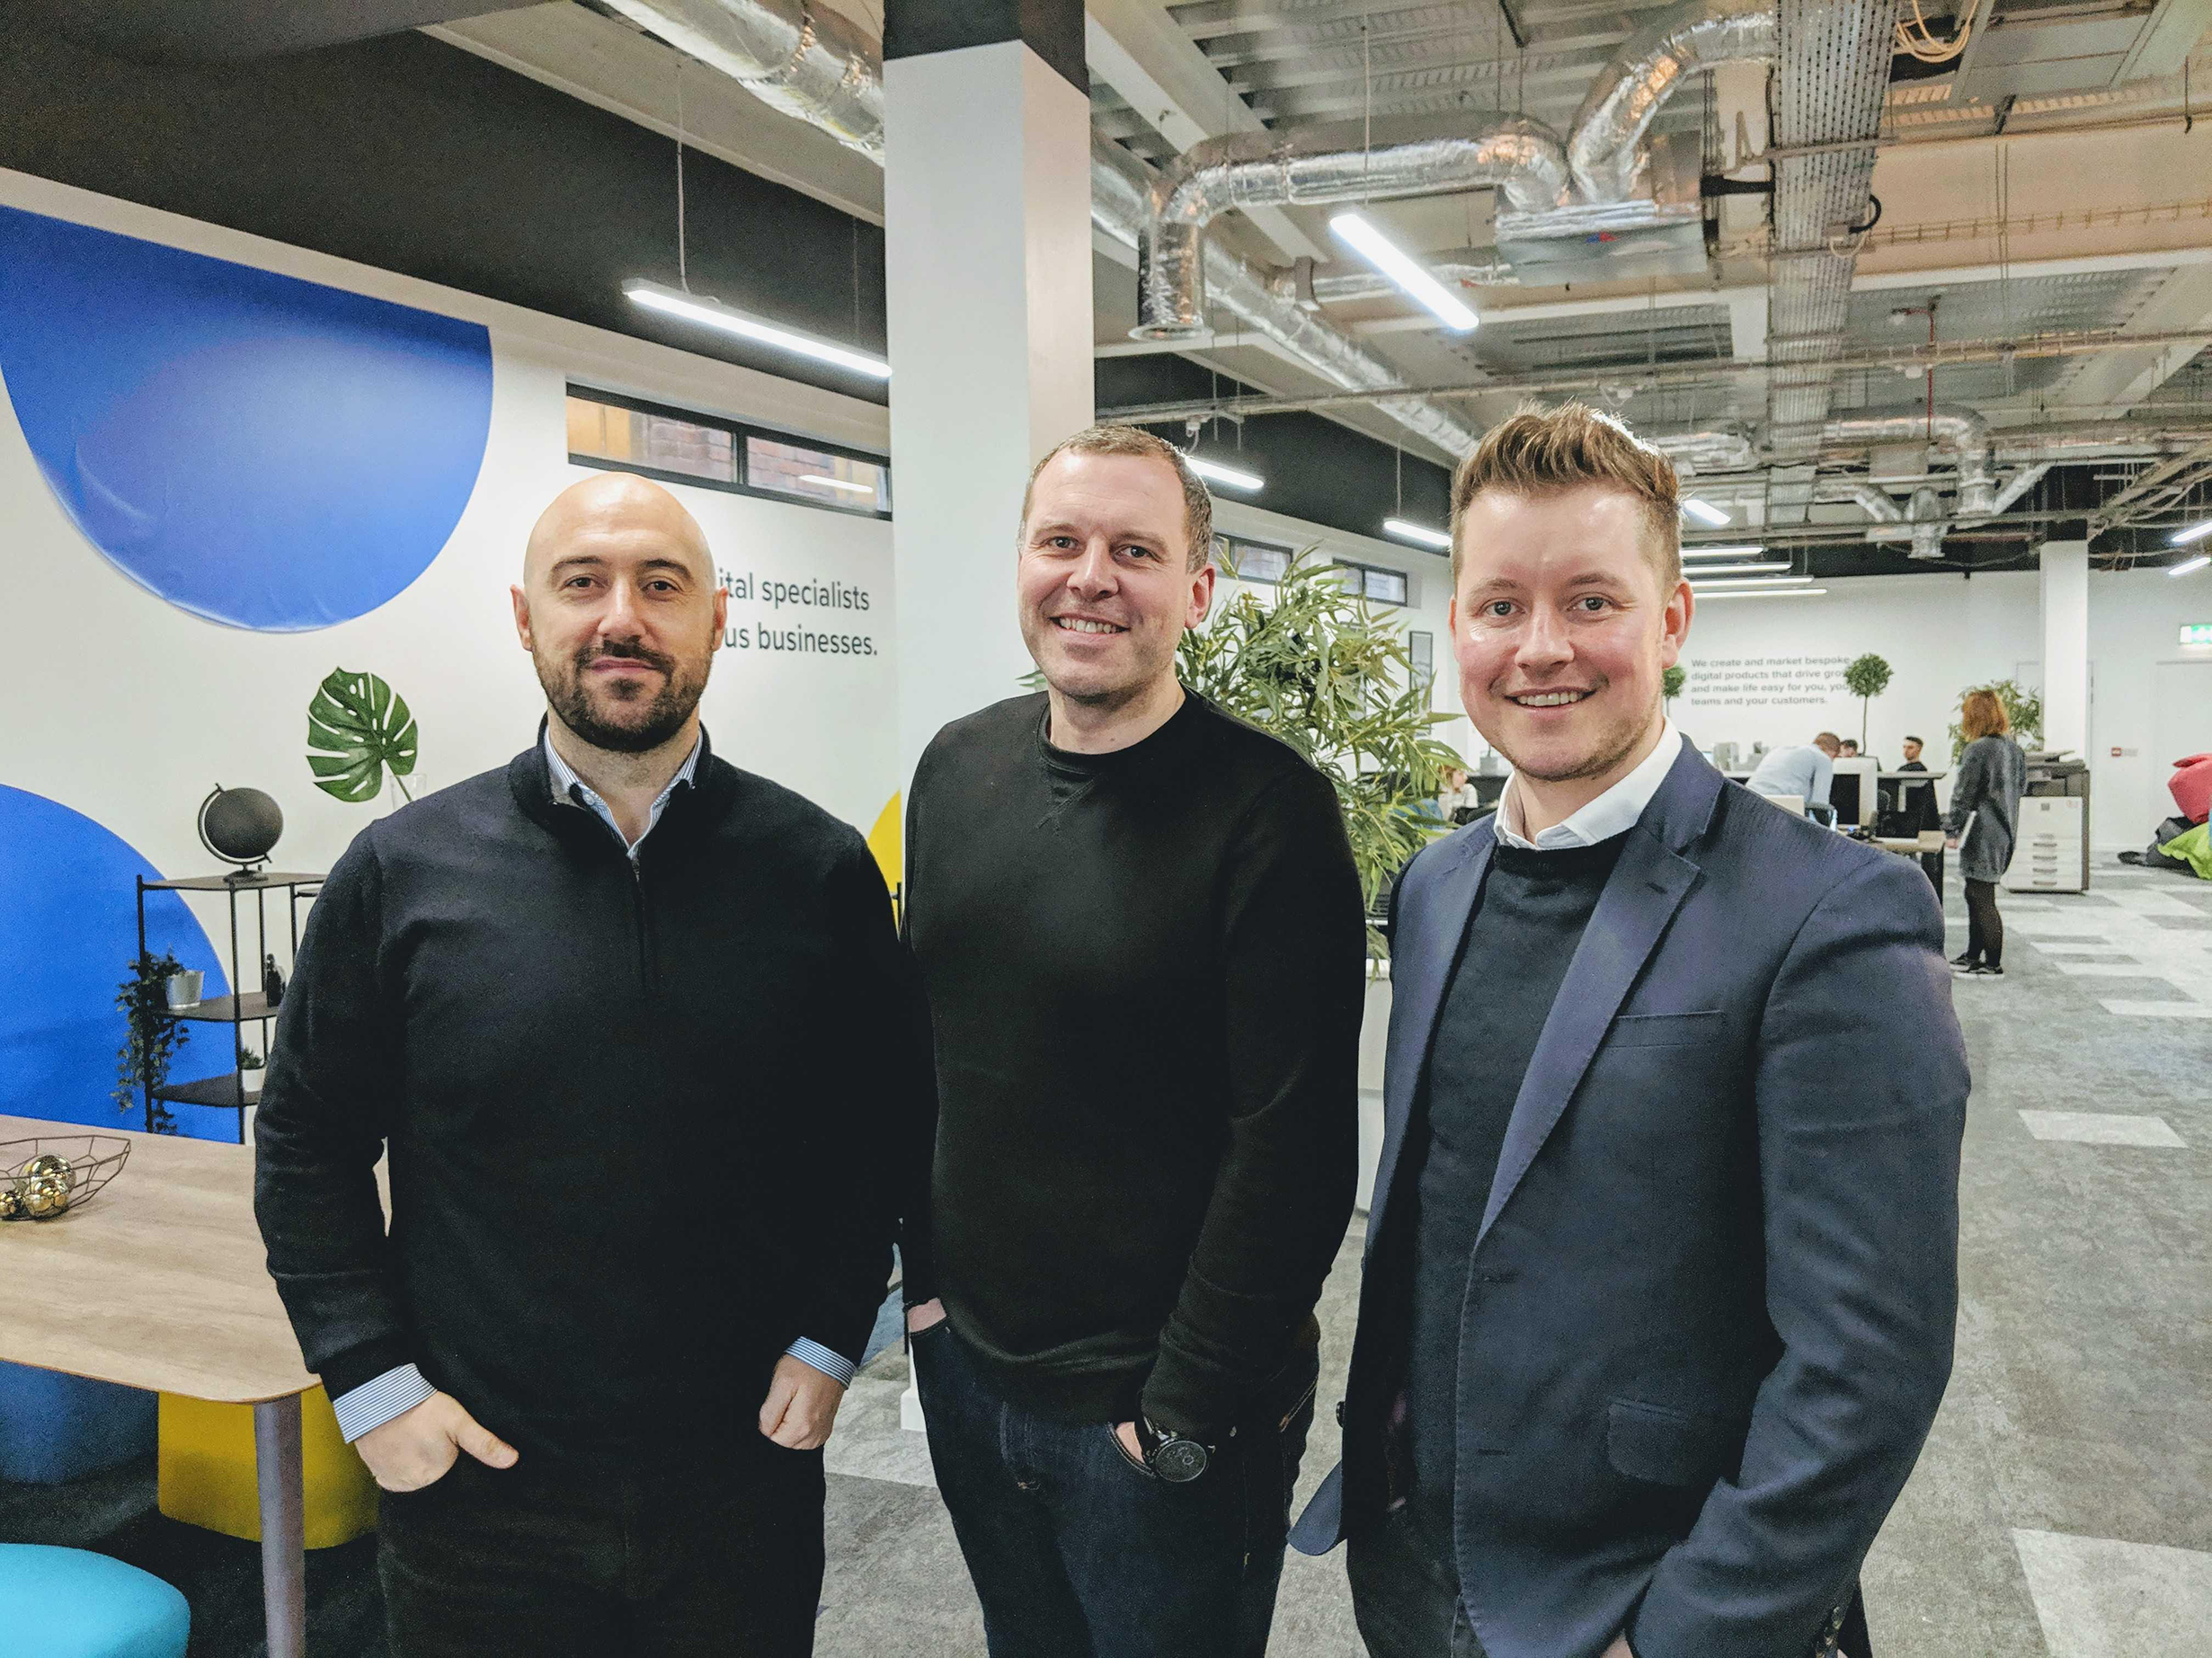 2019-04/1554303122_pj-ellis-anthony-bisseker-and-rob-pollard-of-lightbox-at-the-company-s-new-office